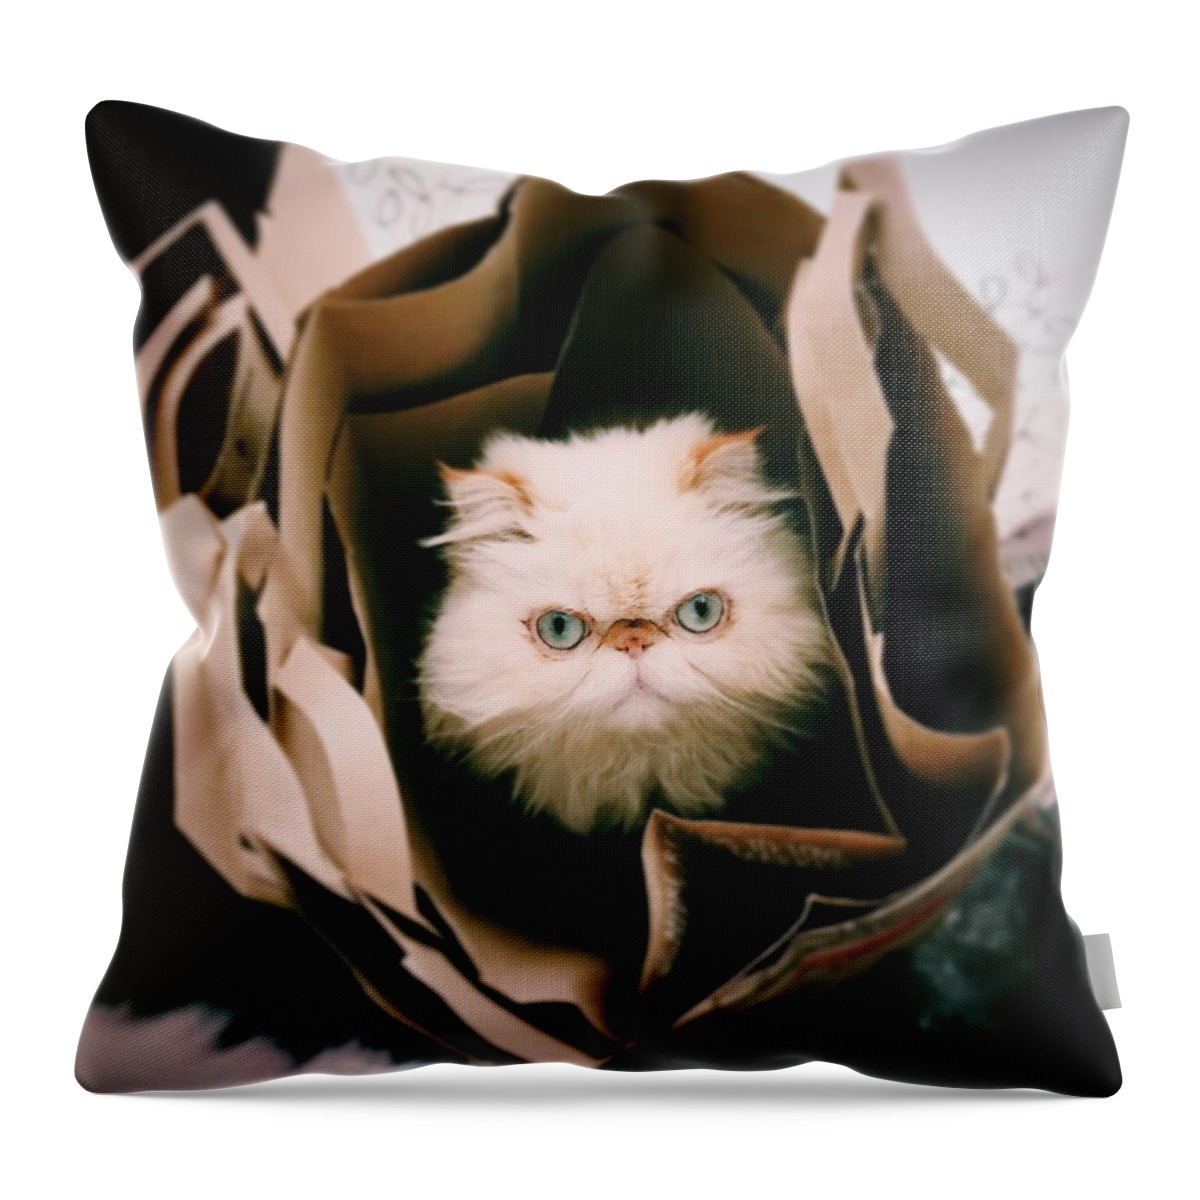 Pets Throw Pillow featuring the photograph Animal Eye Contact by Michael Lofenfeld Photography